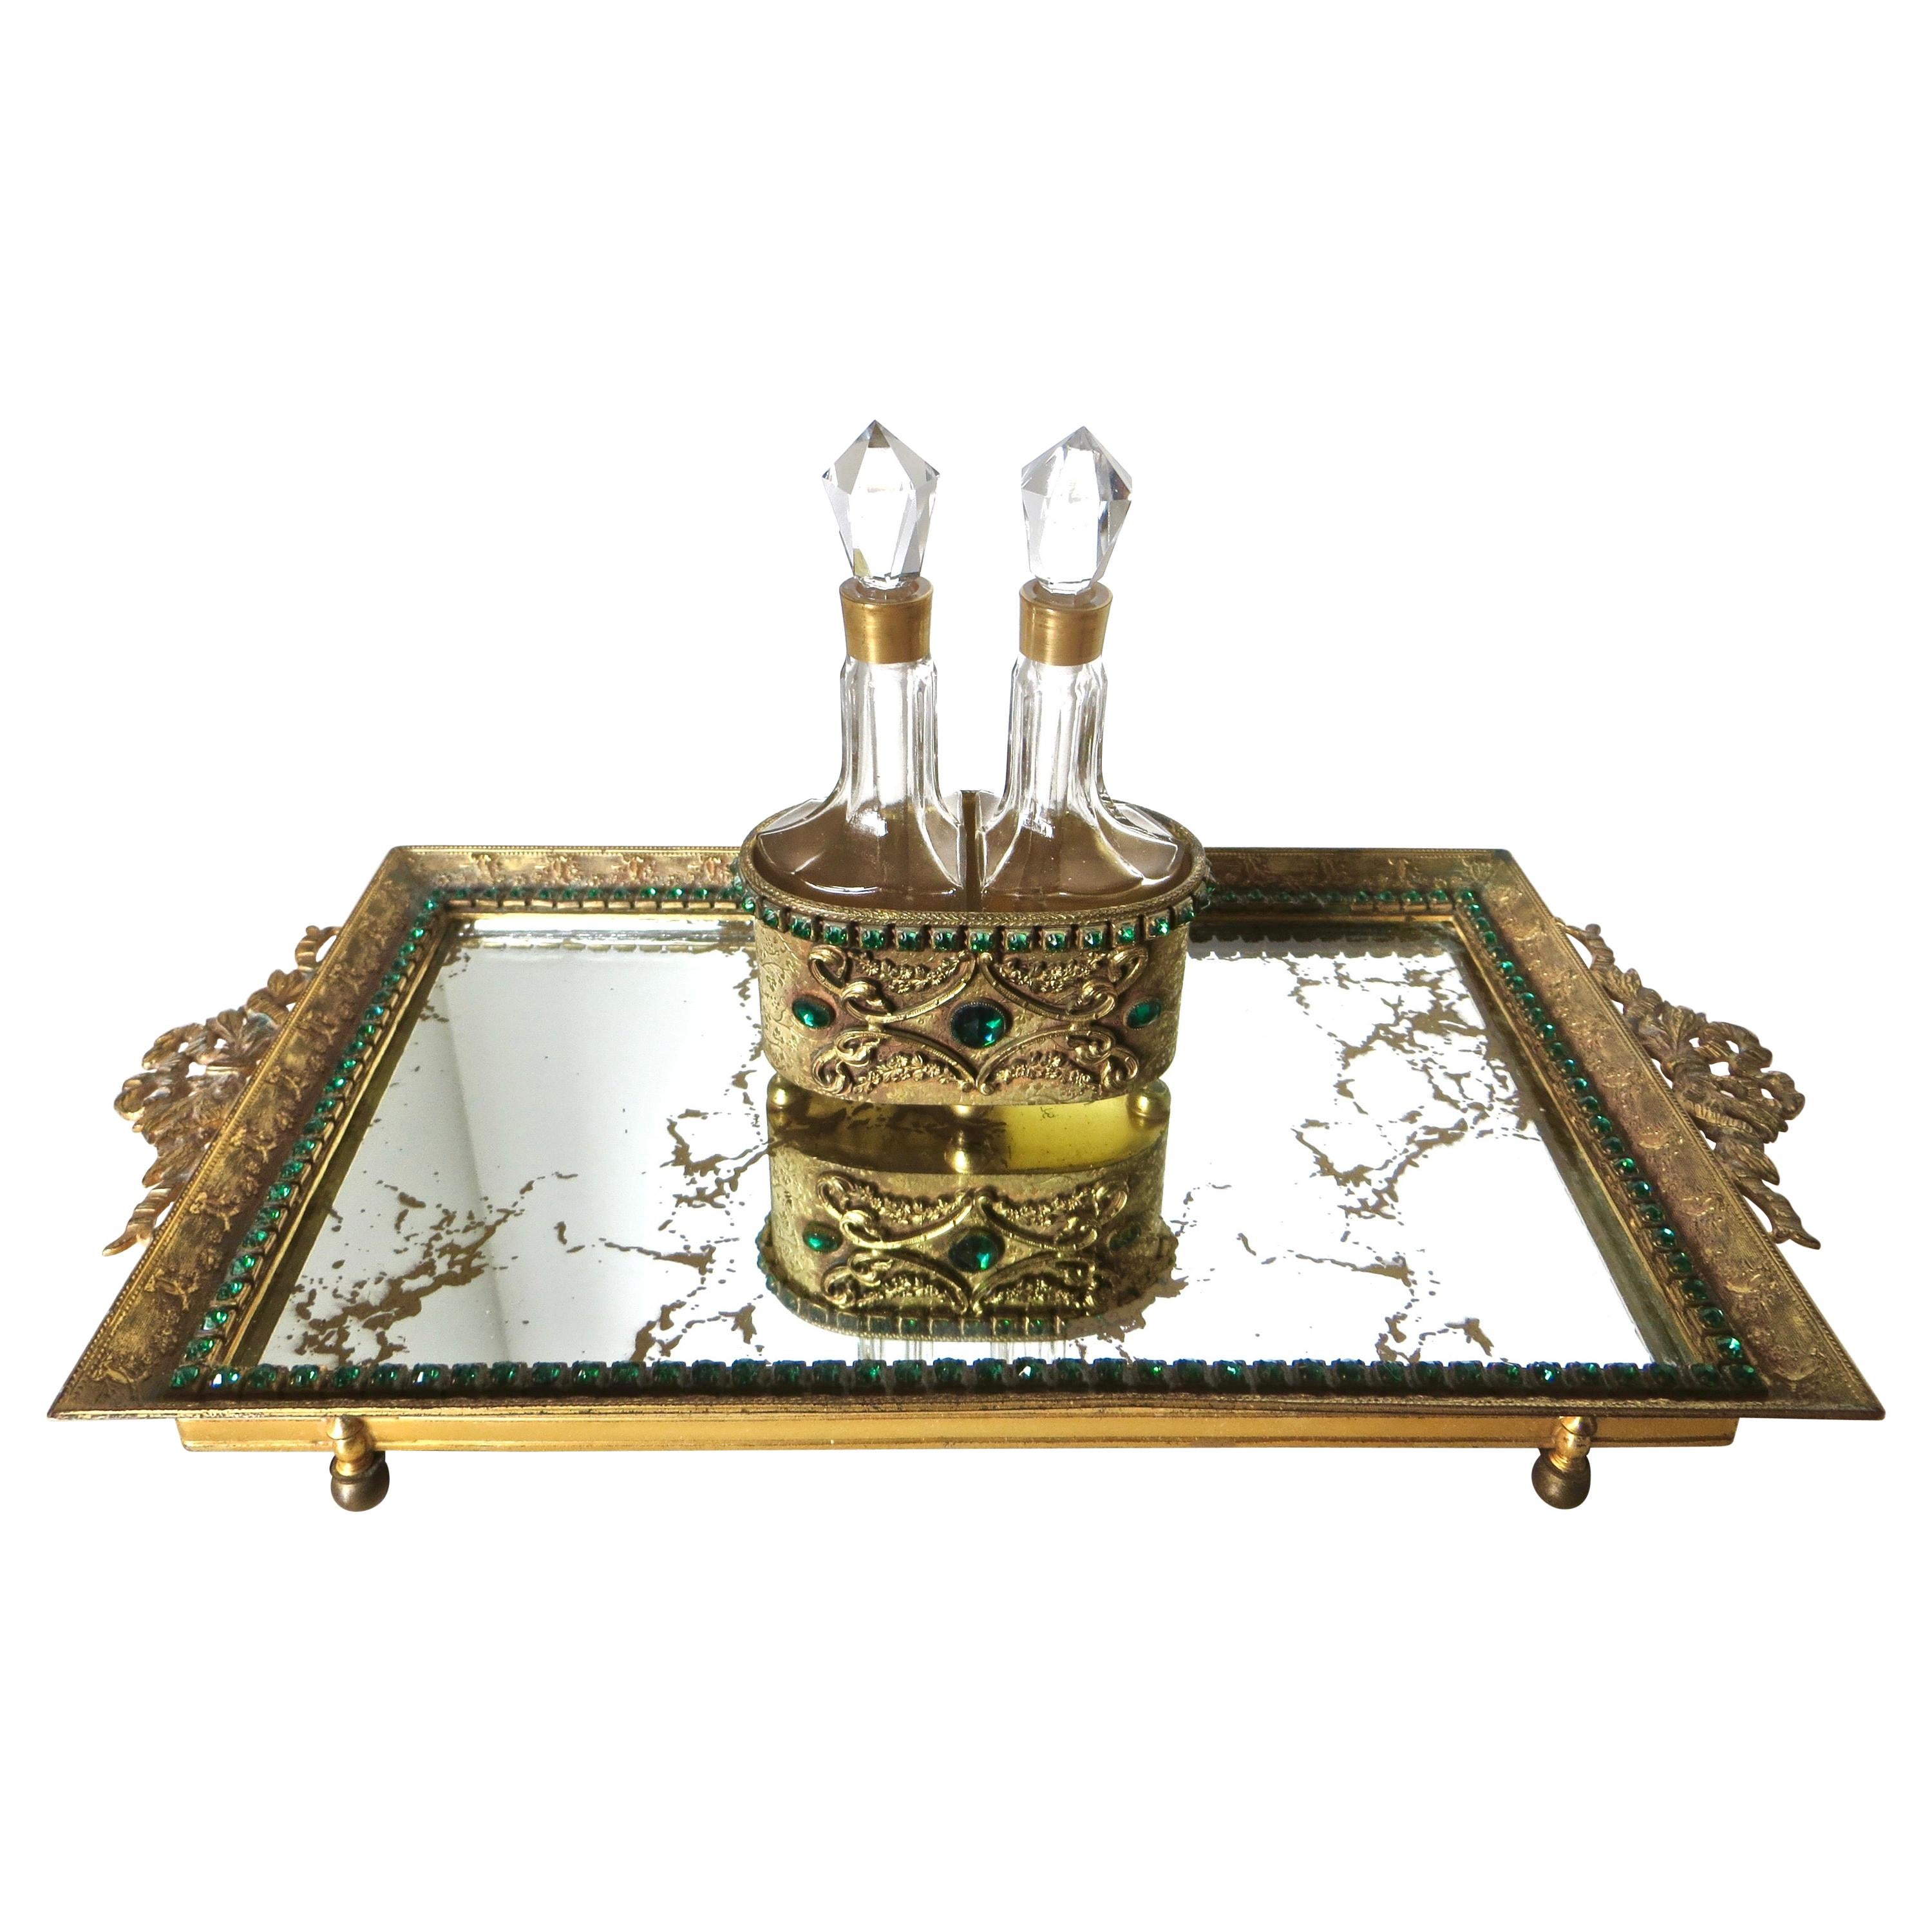 Two Perfume Bottles in Fitted Casket on Decorated Tray by E. & J. Bass, Ca 1900 For Sale